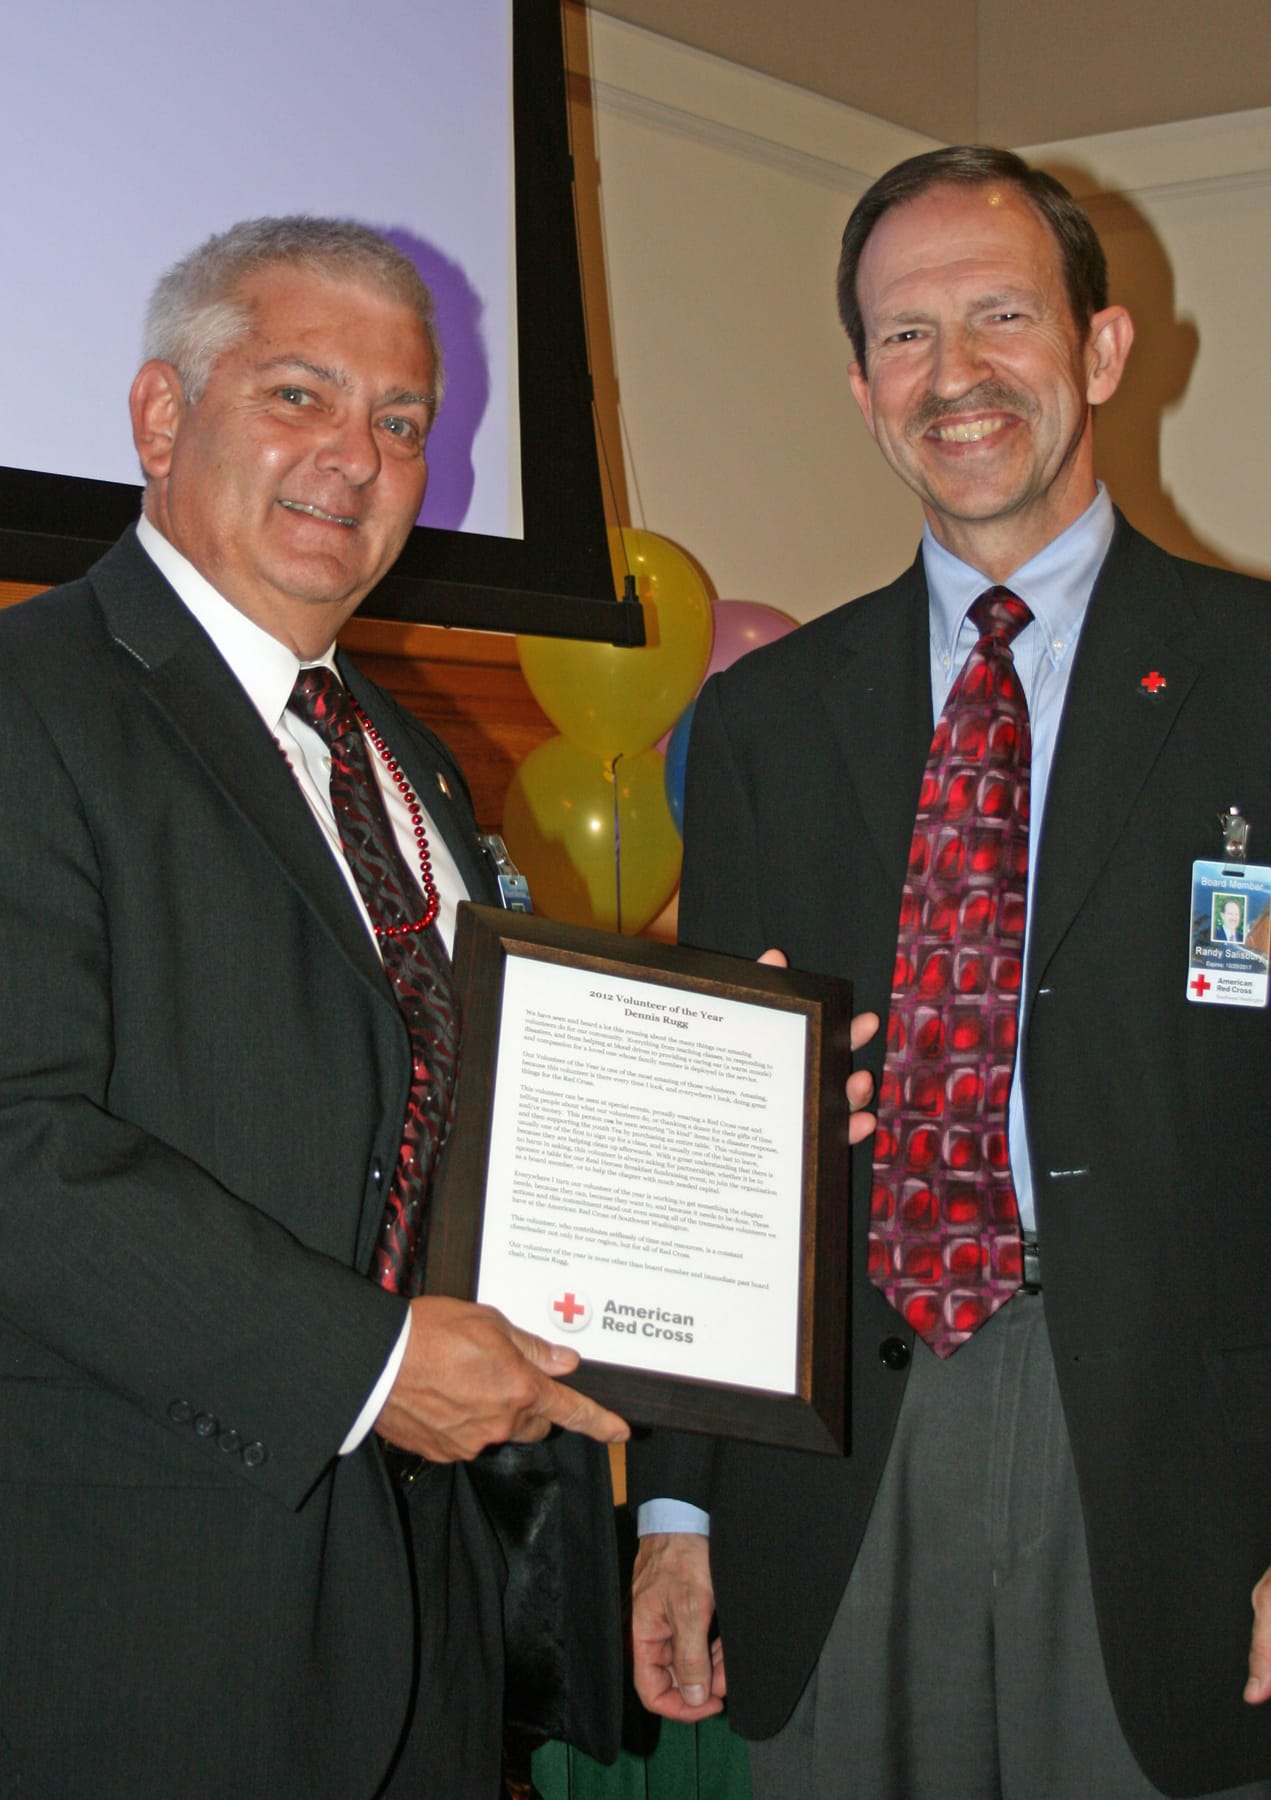 Fourth Plain Village: Dennis Rugg, left, was named Volunteer of the Year by the American Red Cross Southwest Washington chapter.